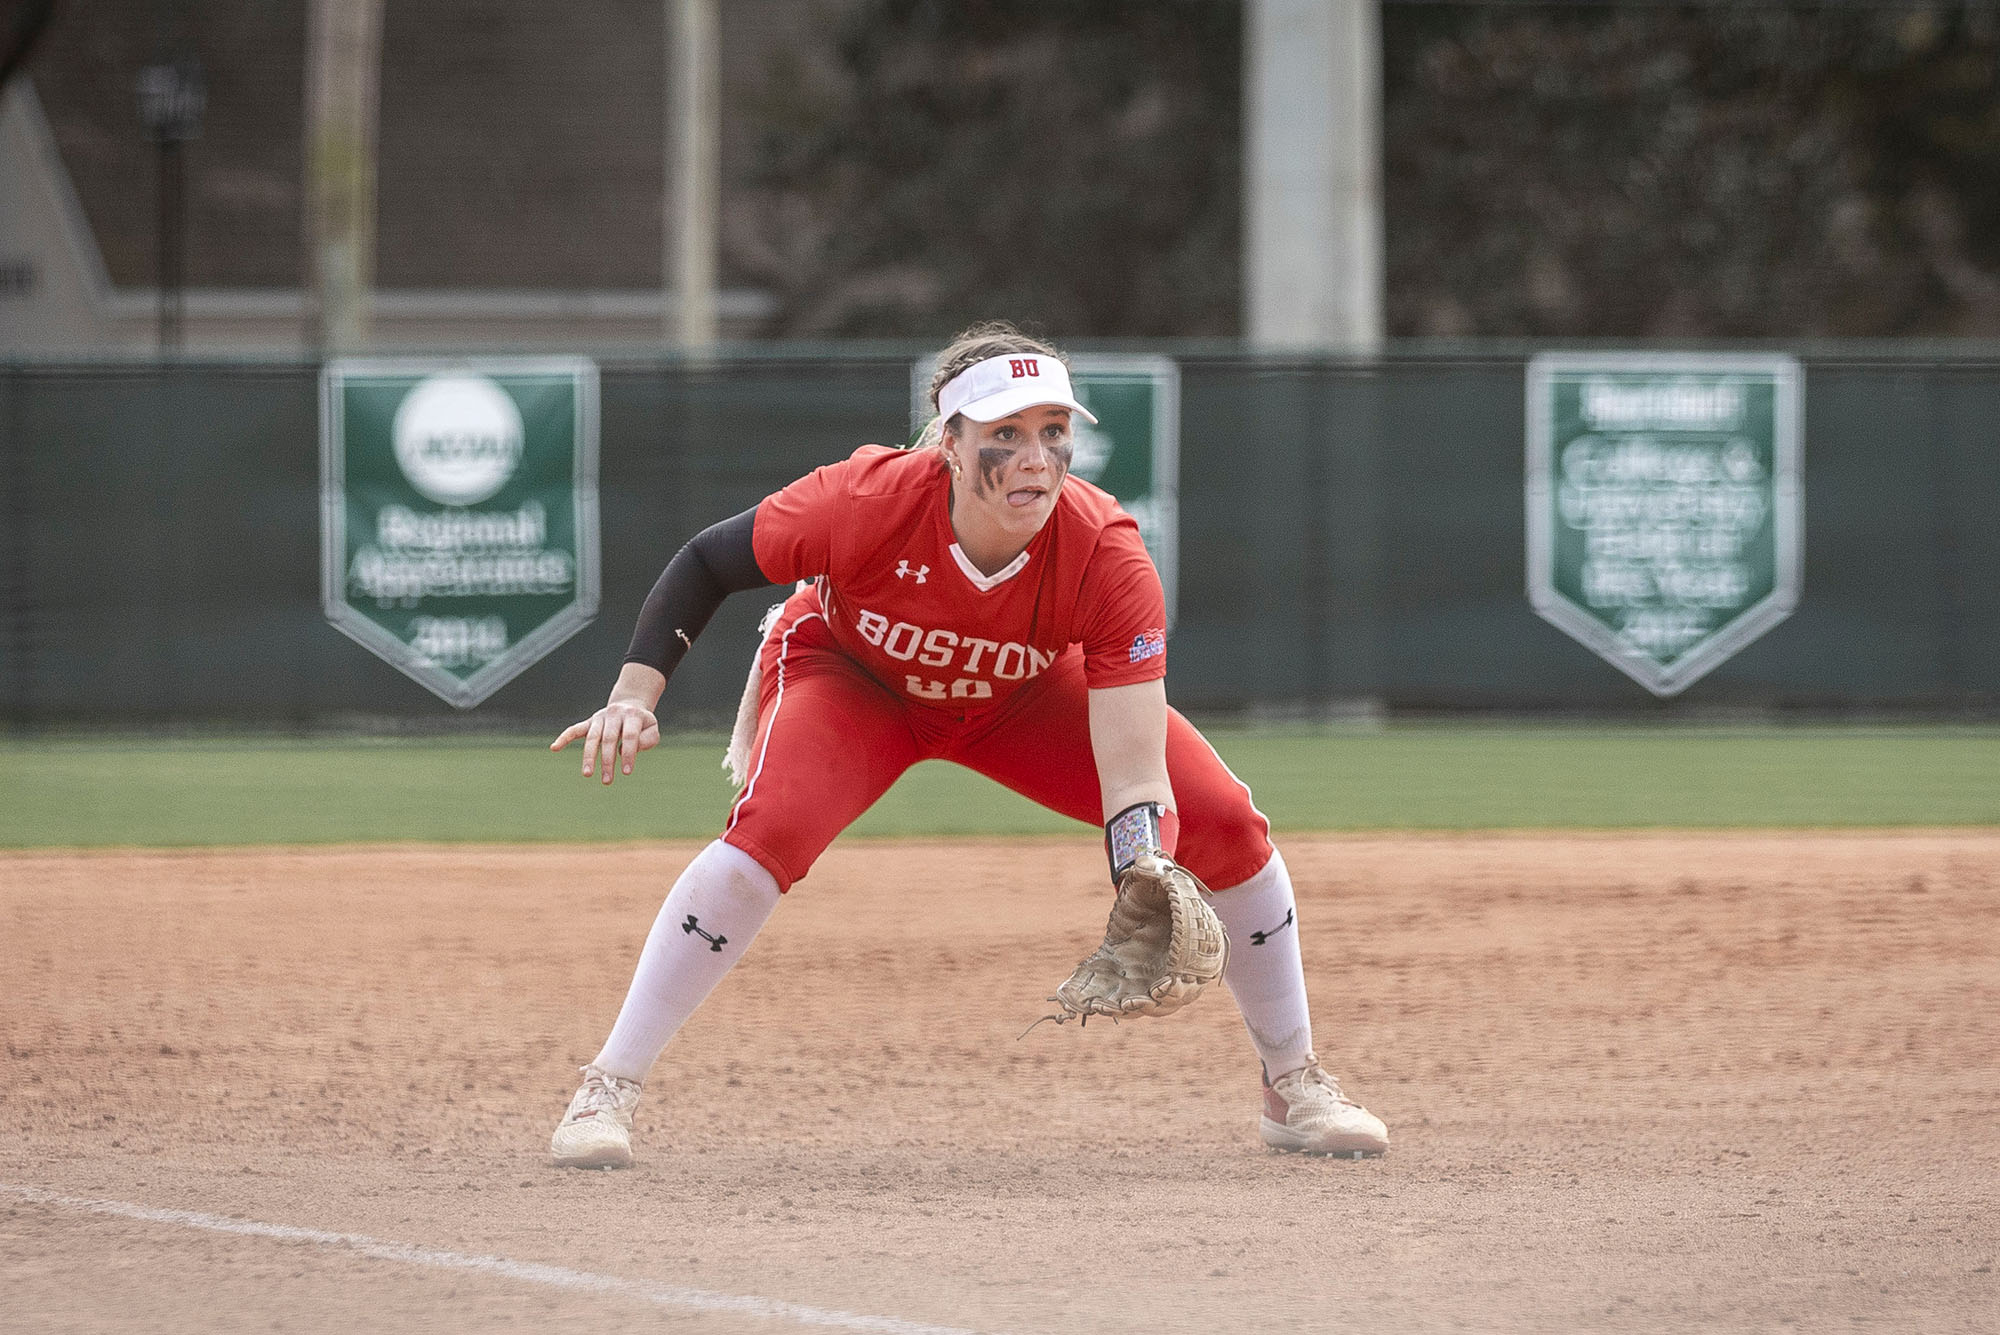 Photo: A softball player on the field. She is wearing a red uniform with white accents